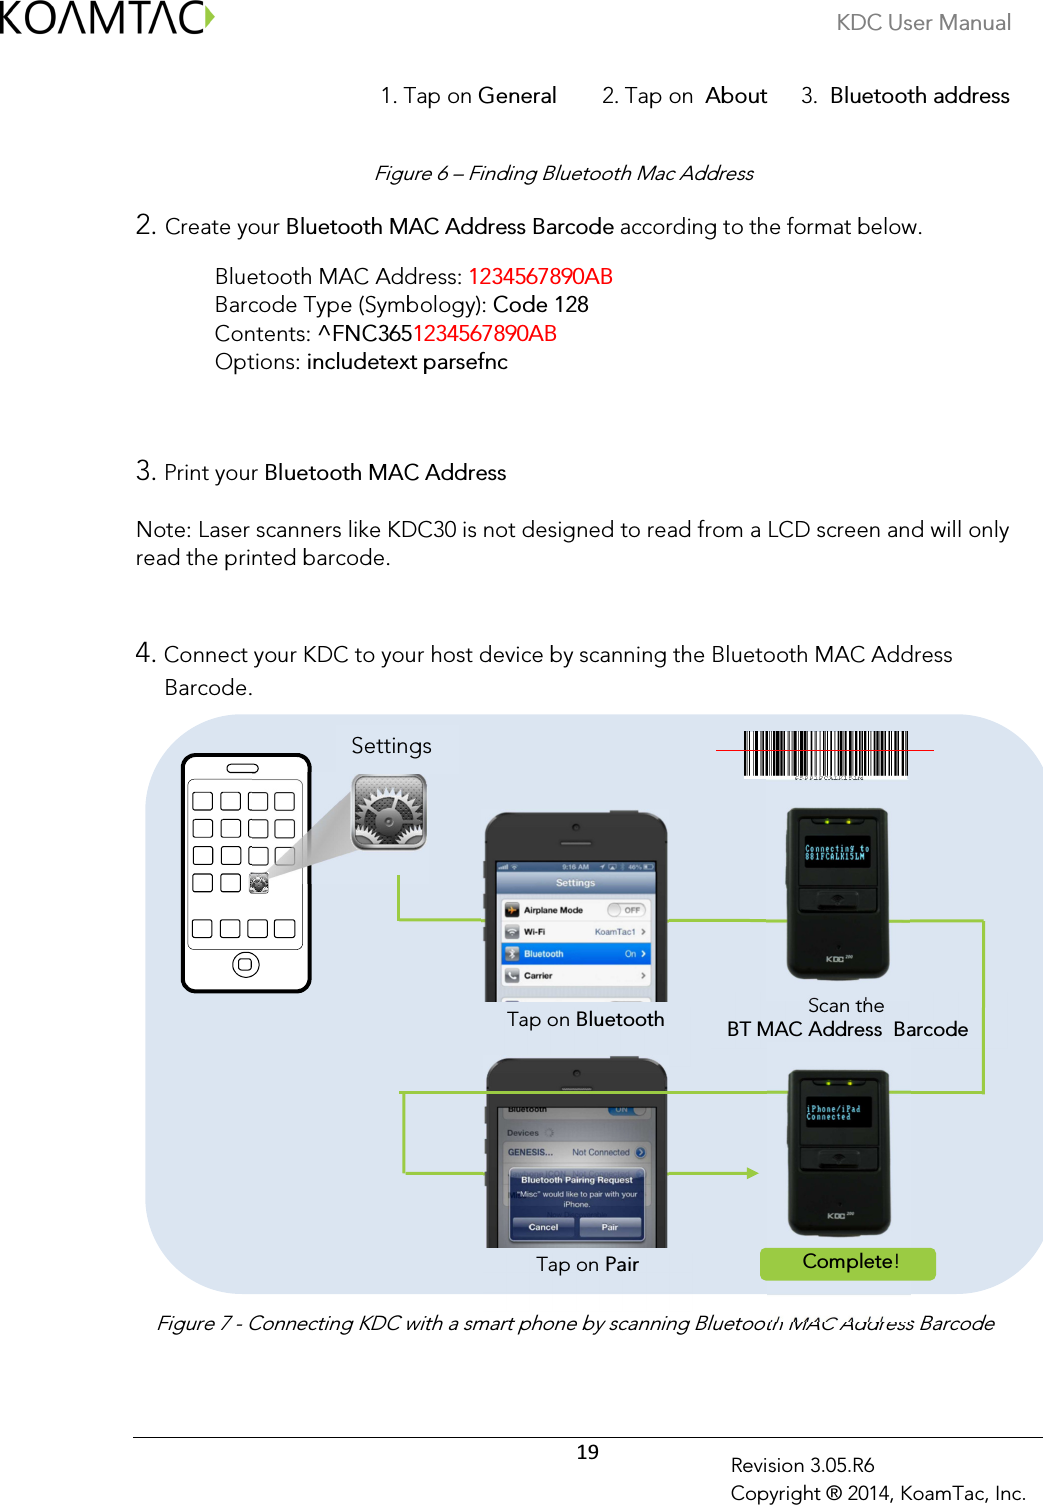 KDC User Manual  19 Revision 3.05.R6 Copyright ® 2014, KoamTac, Inc.                                            1. Tap on General        2. Tap on  About      3.  Bluetooth address   Figure 6 – Finding Bluetooth Mac Address  2. Create your Bluetooth MAC Address Barcode according to the format below.  Bluetooth MAC Address: 1234567890AB    Barcode Type (Symbology): Code 128  Contents: ^FNC3651234567890AB                       Options: includetext parsefnc                   3. Print your Bluetooth MAC Address    Note: Laser scanners like KDC30 is not designed to read from a LCD screen and will only read the printed barcode.     4. Connect your KDC to your host device by scanning the Bluetooth MAC Address Barcode.               Figure 7 - Connecting KDC with a smart phone by scanning Bluetooth MAC Address Barcode   Tap on Bluetooth Scan the  BT MAC Address  Barcode Tap on Pair Complete! Settings 